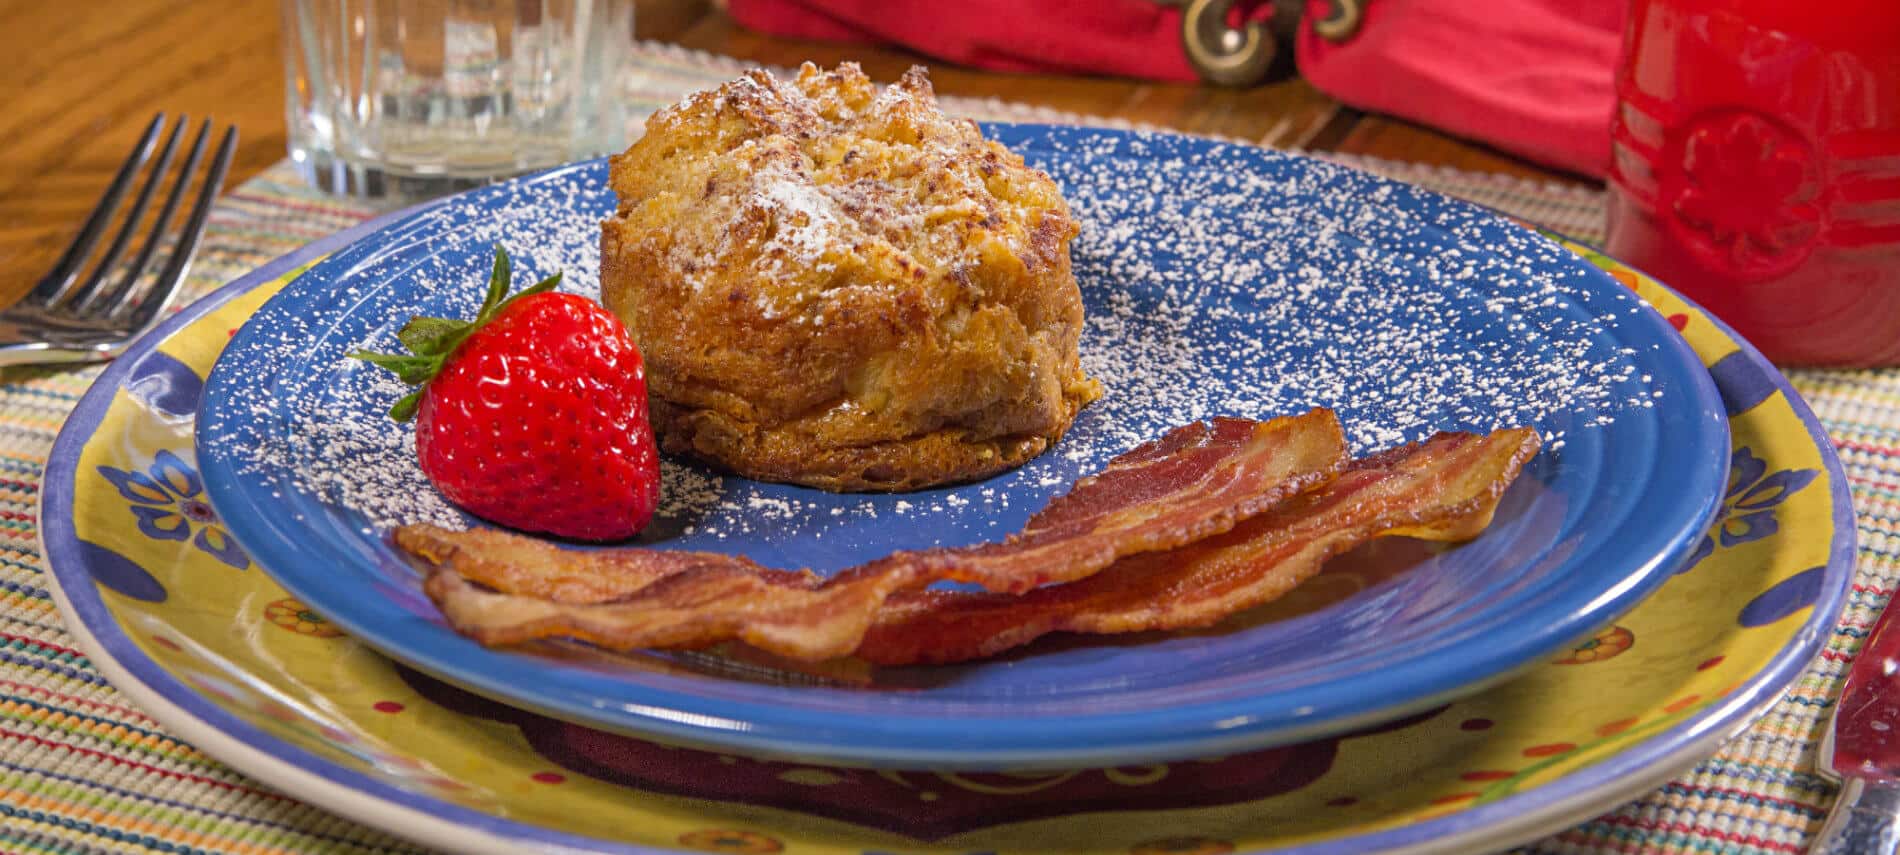 Blue ceramic plate on a colorful charger topped with bacon, red strawberry and golden baked french toast